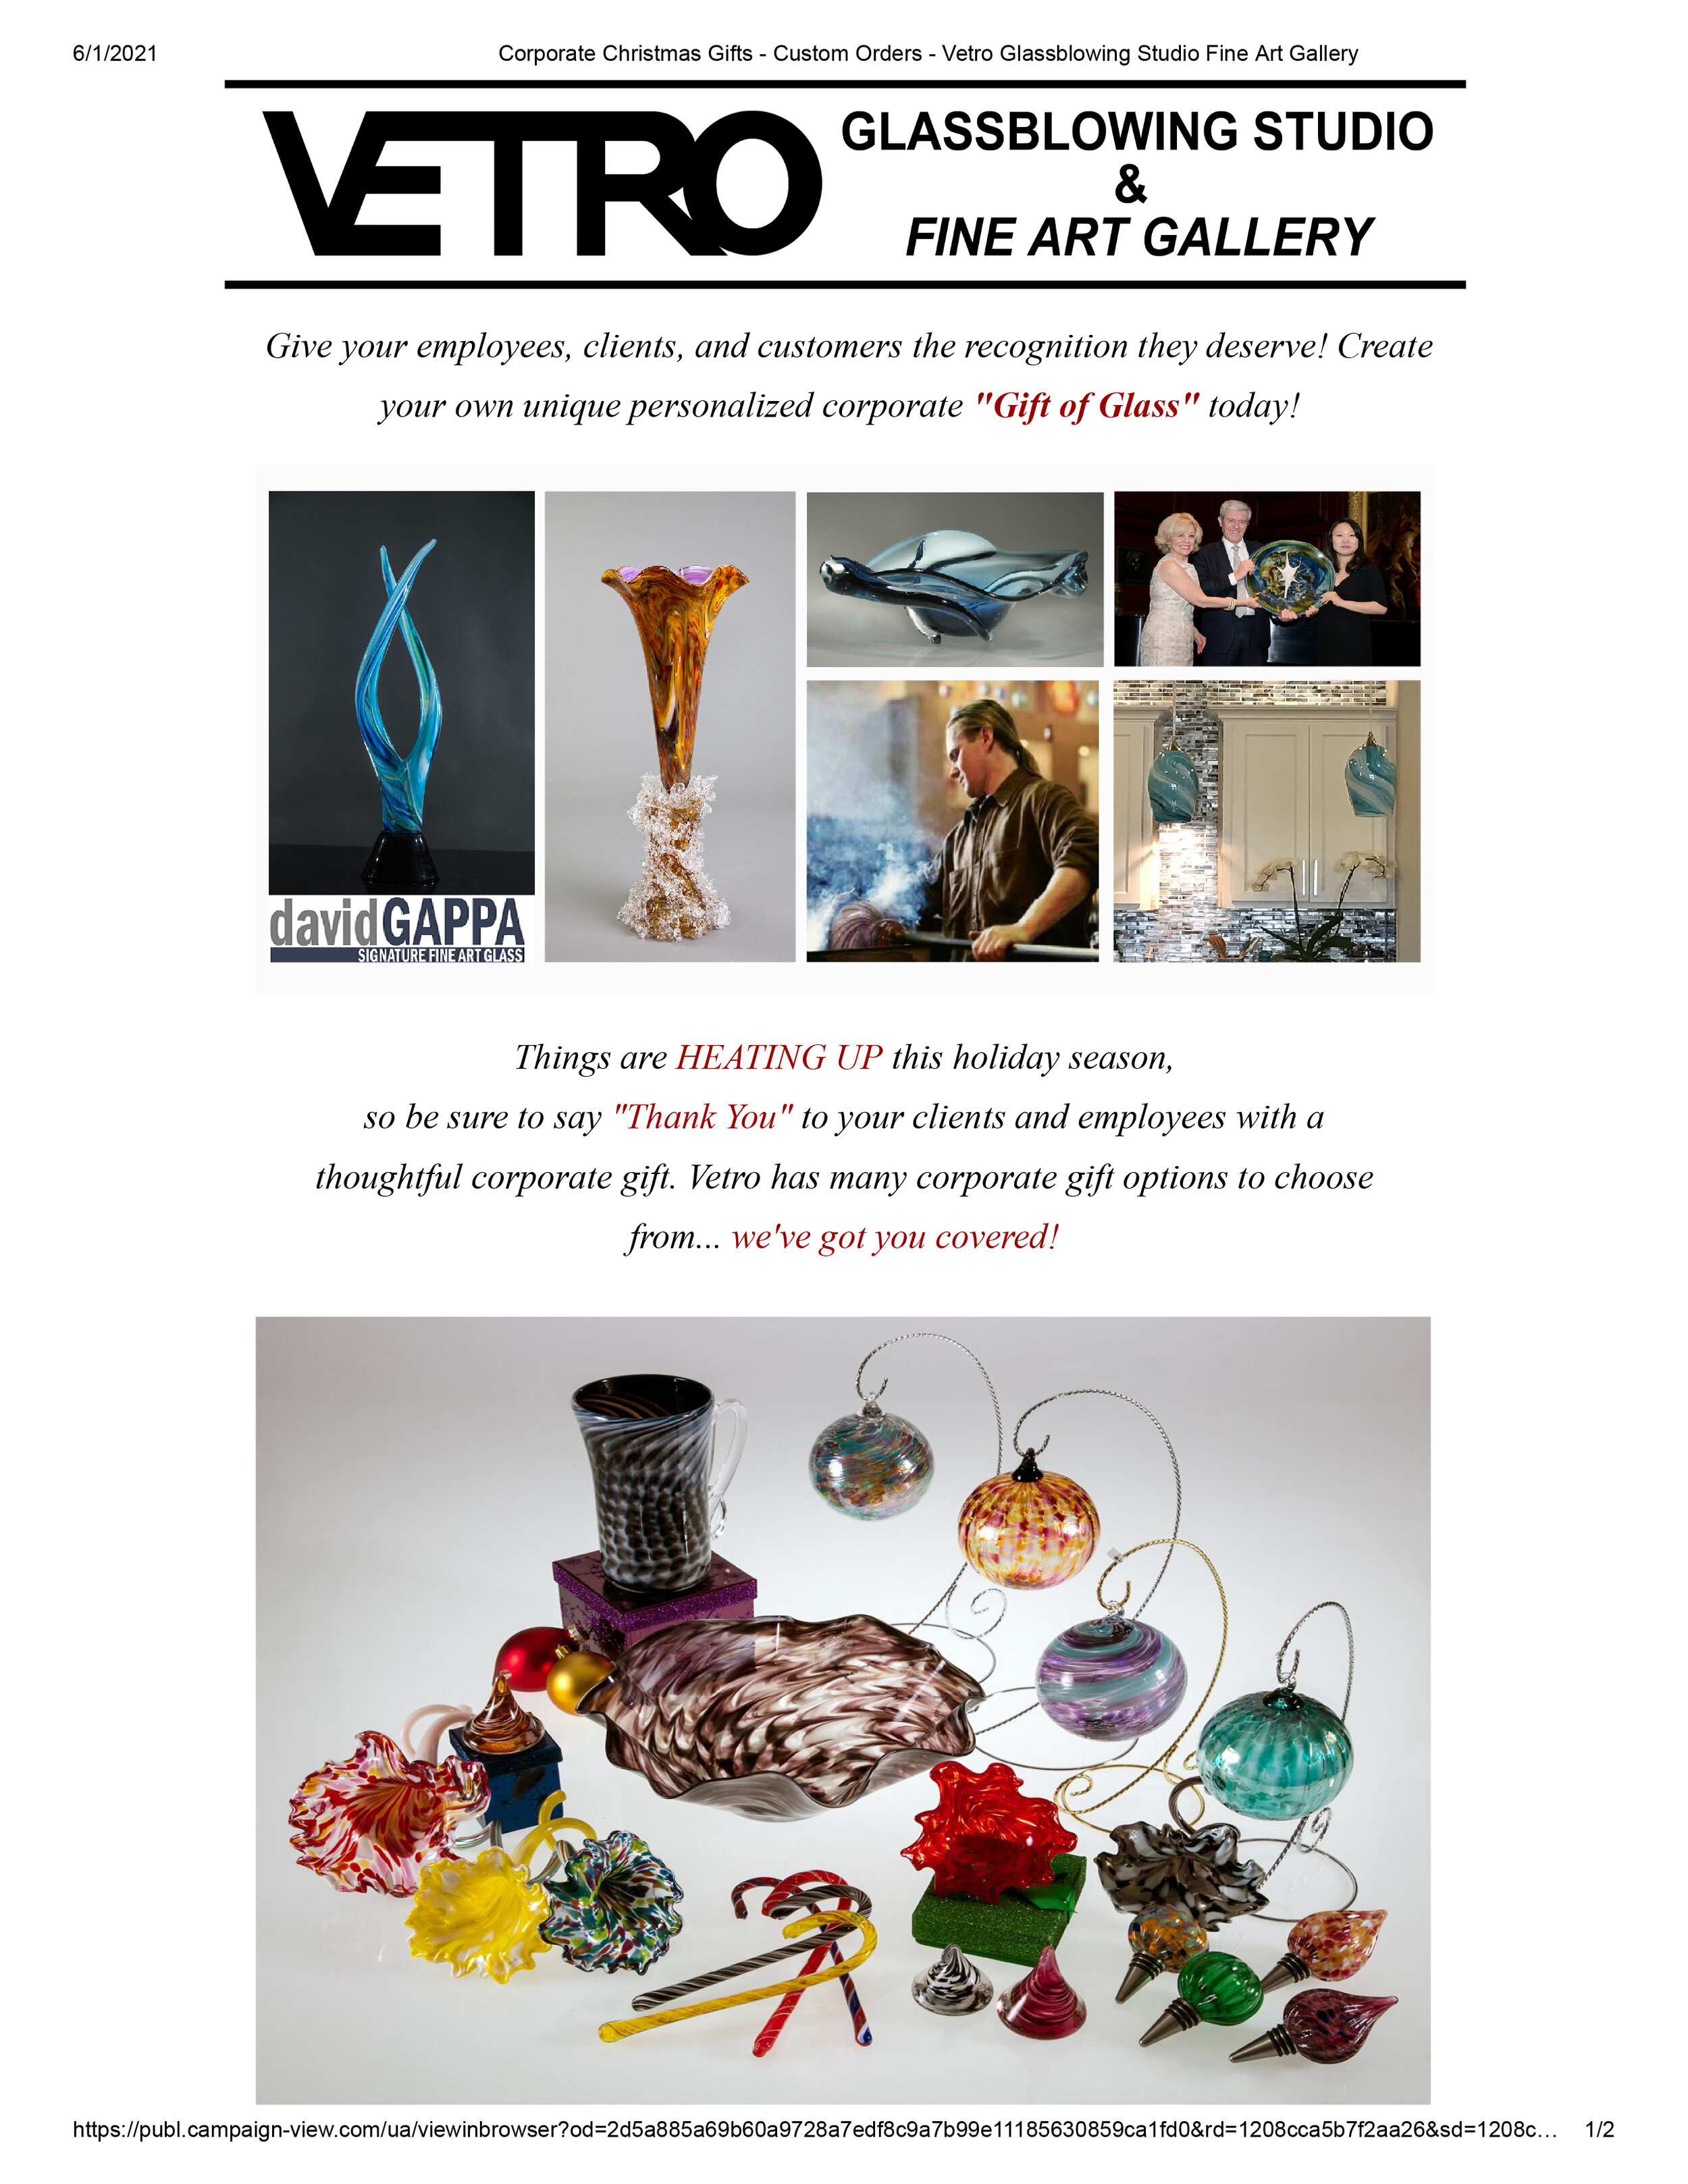 Email Campaigns -Vetro Glassblowing Studio - Things are HEATING UP this holiday season-1.jpg